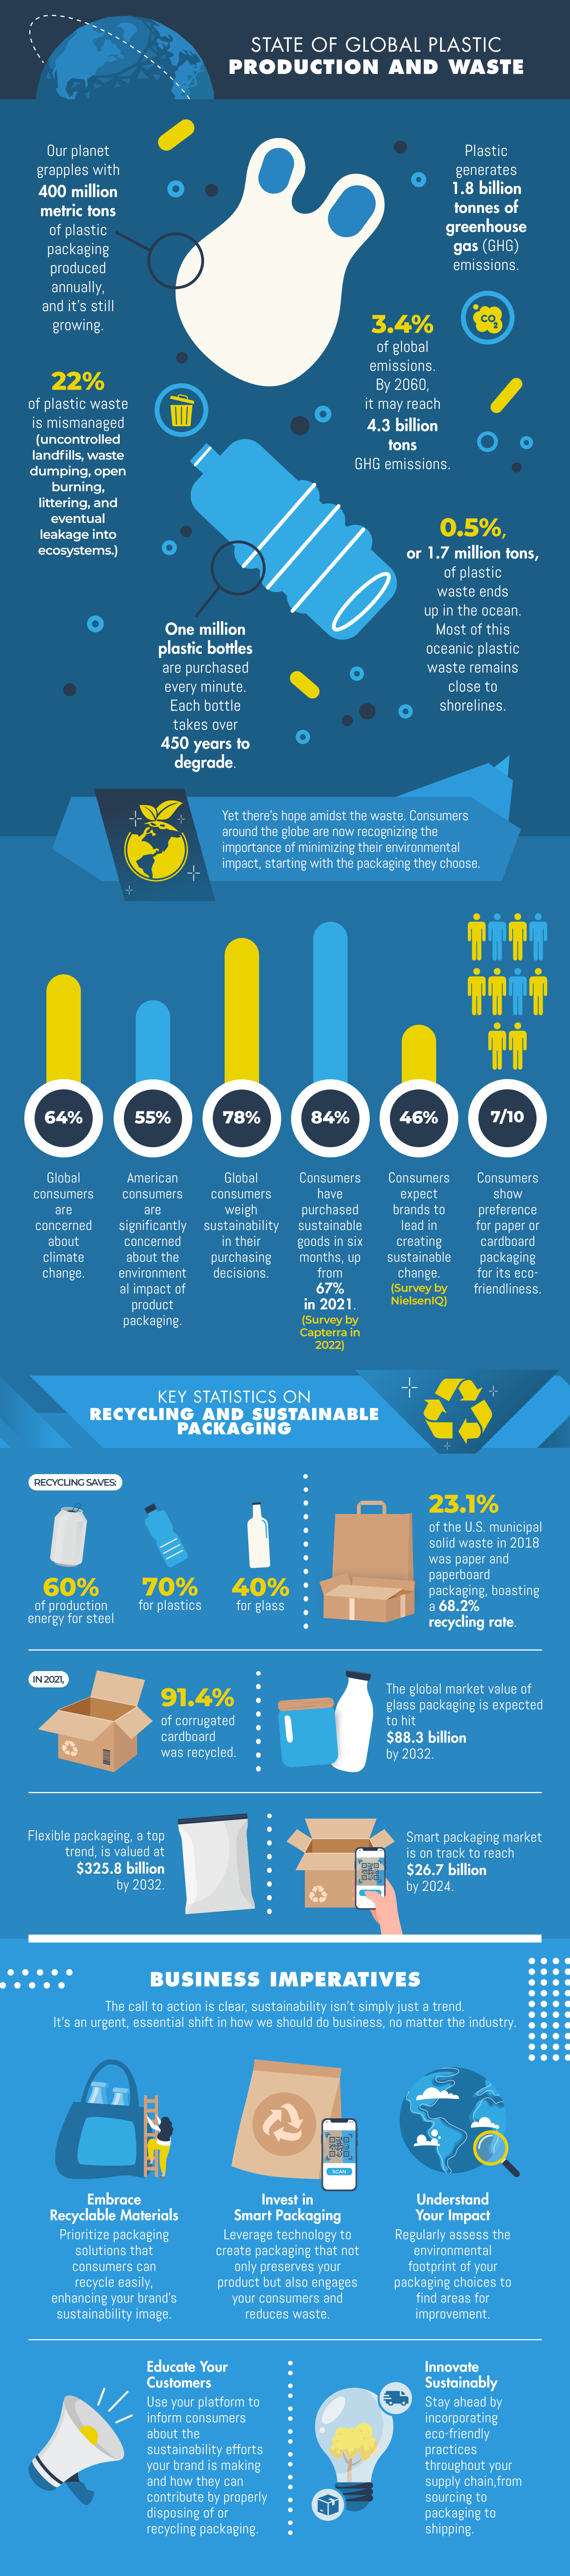 Infographic detailing the global impact of plastic production and waste, highlighting statistics on plastic pollution, greenhouse gas emissions, and consumer trends toward sustainable packaging. Key statistics include 400 million metric tons of plastic packaging produced annually, 22% mismanaged plastic waste, 78% of global consumers considering sustainability in purchasing decisions, and a 60% reduction in production energy for steel through recycling. The infographic also outlines business imperatives for sustainability, such as embracing recyclable materials, investing in smart packaging, understanding environmental impact, educating customers, and innovating sustainably.